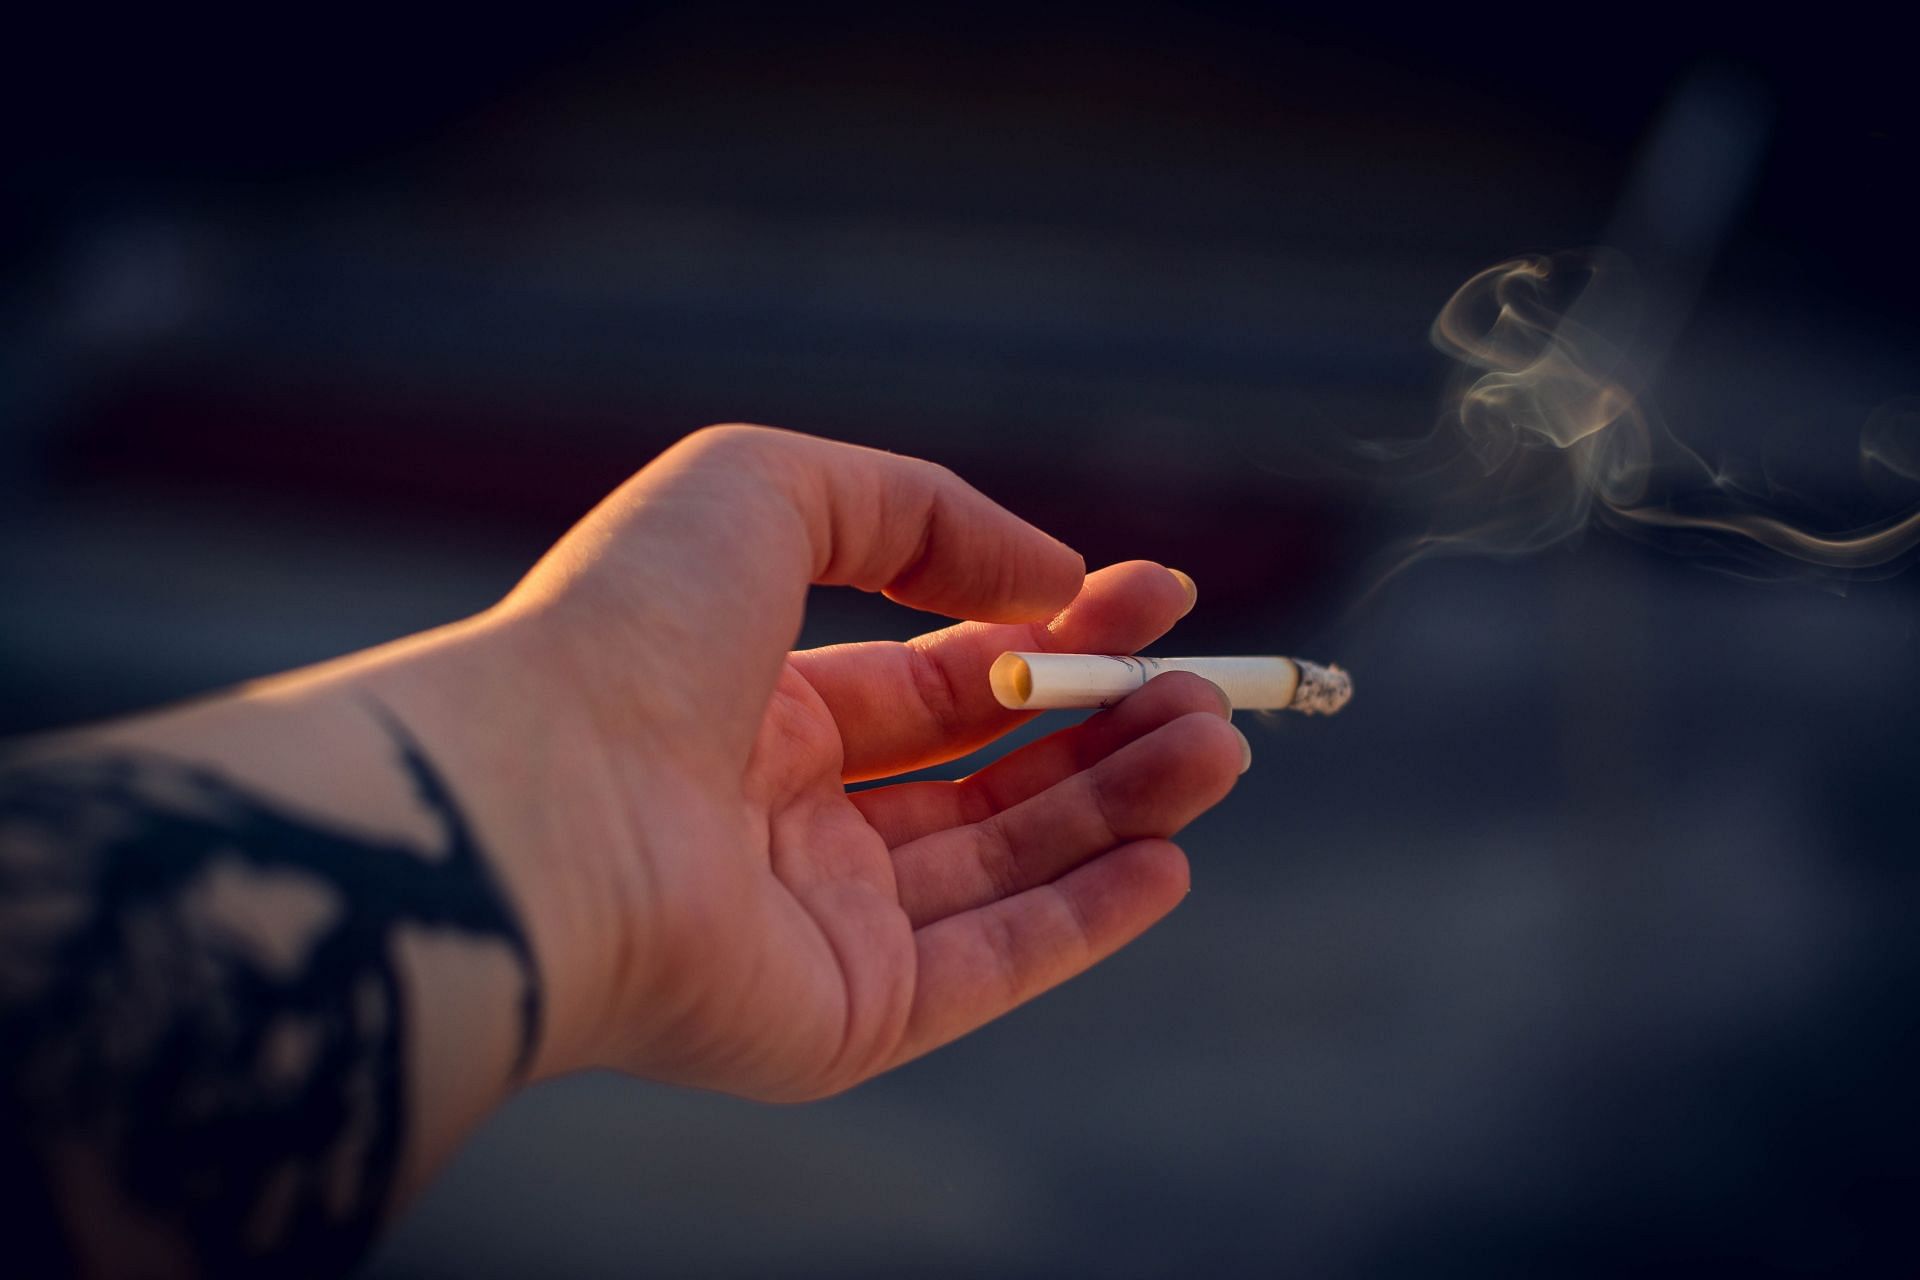 Smoking can be injurious in your pursuit of healthy gums. (Image via Pexels/Irina Iriser)